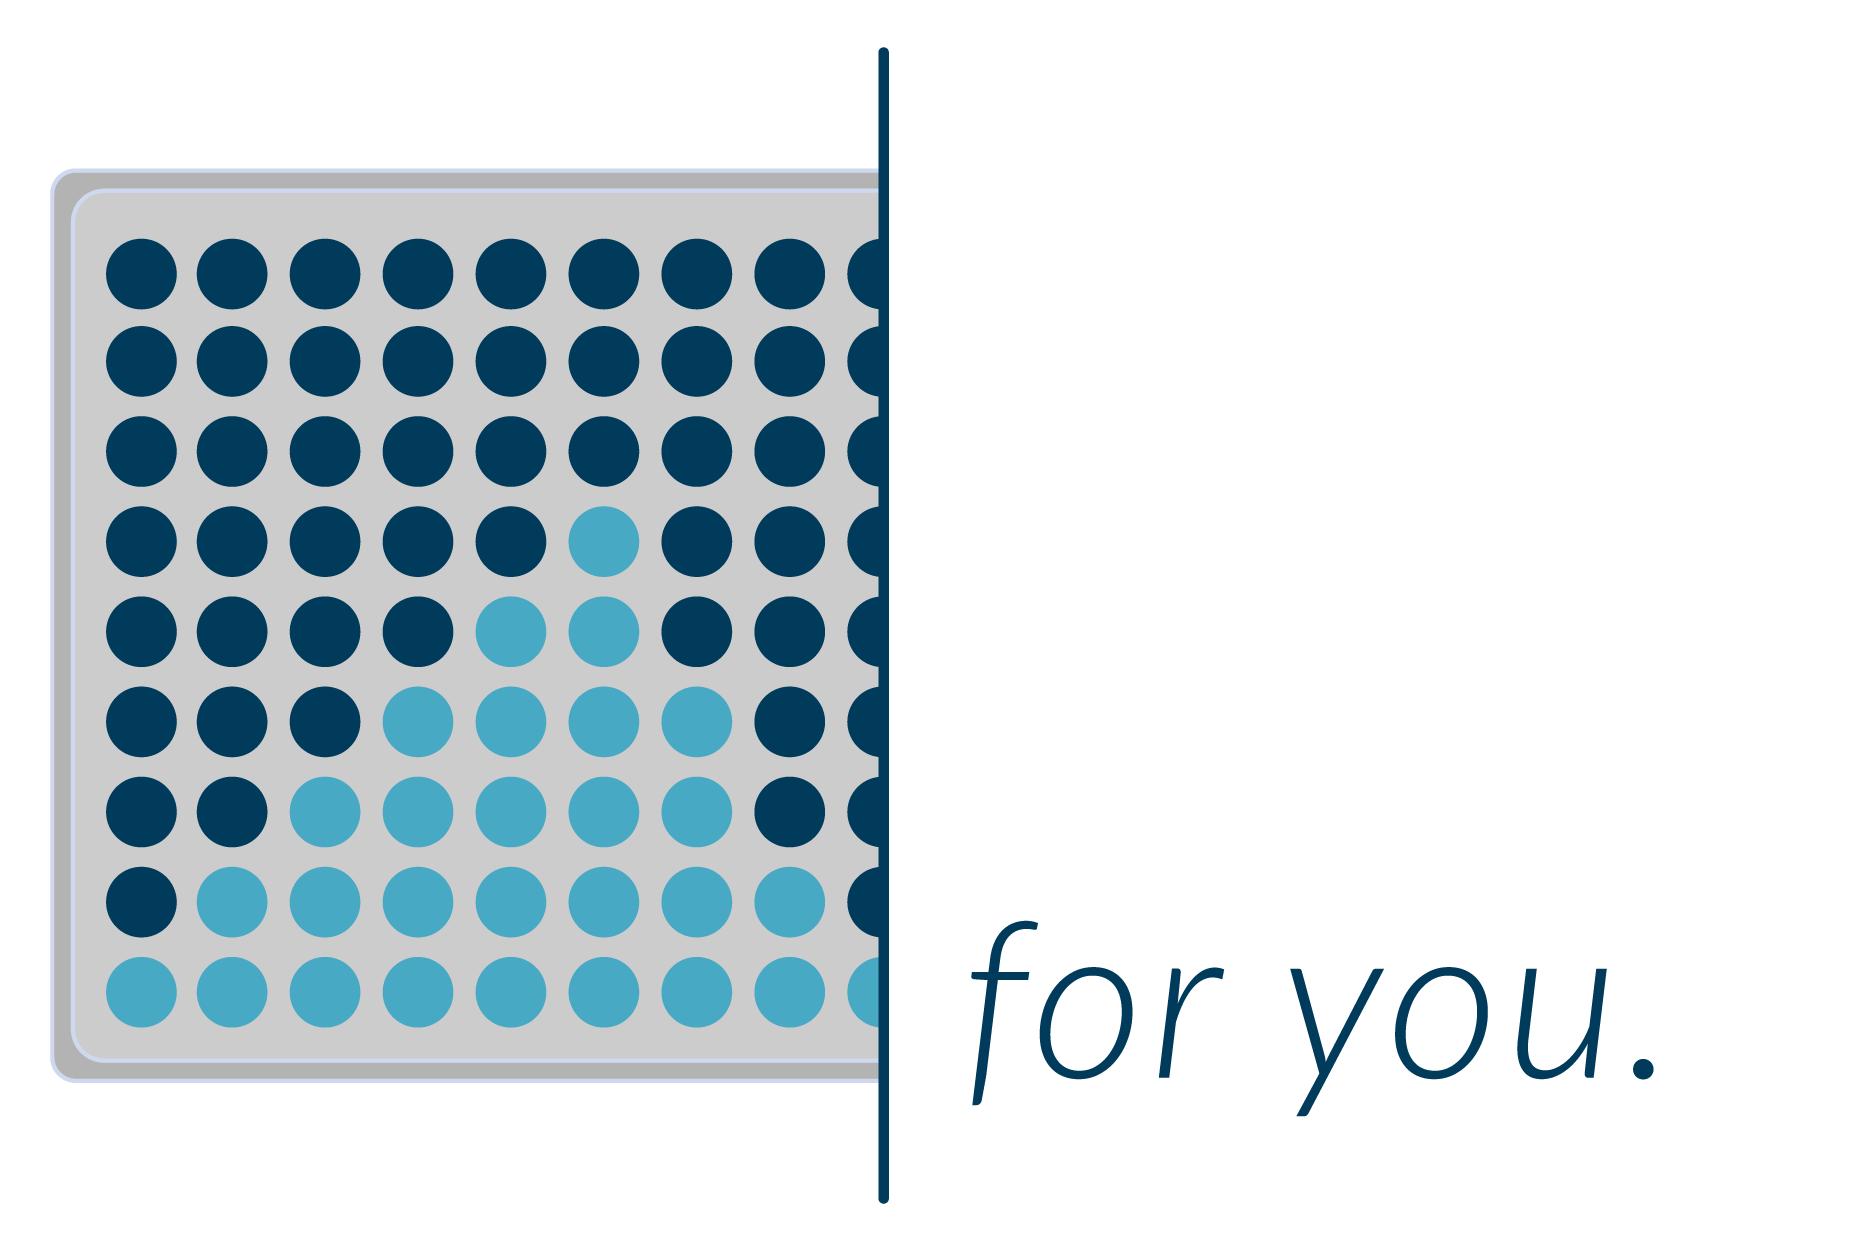 Next Generation Sequencing | Integrated DNA Technologies